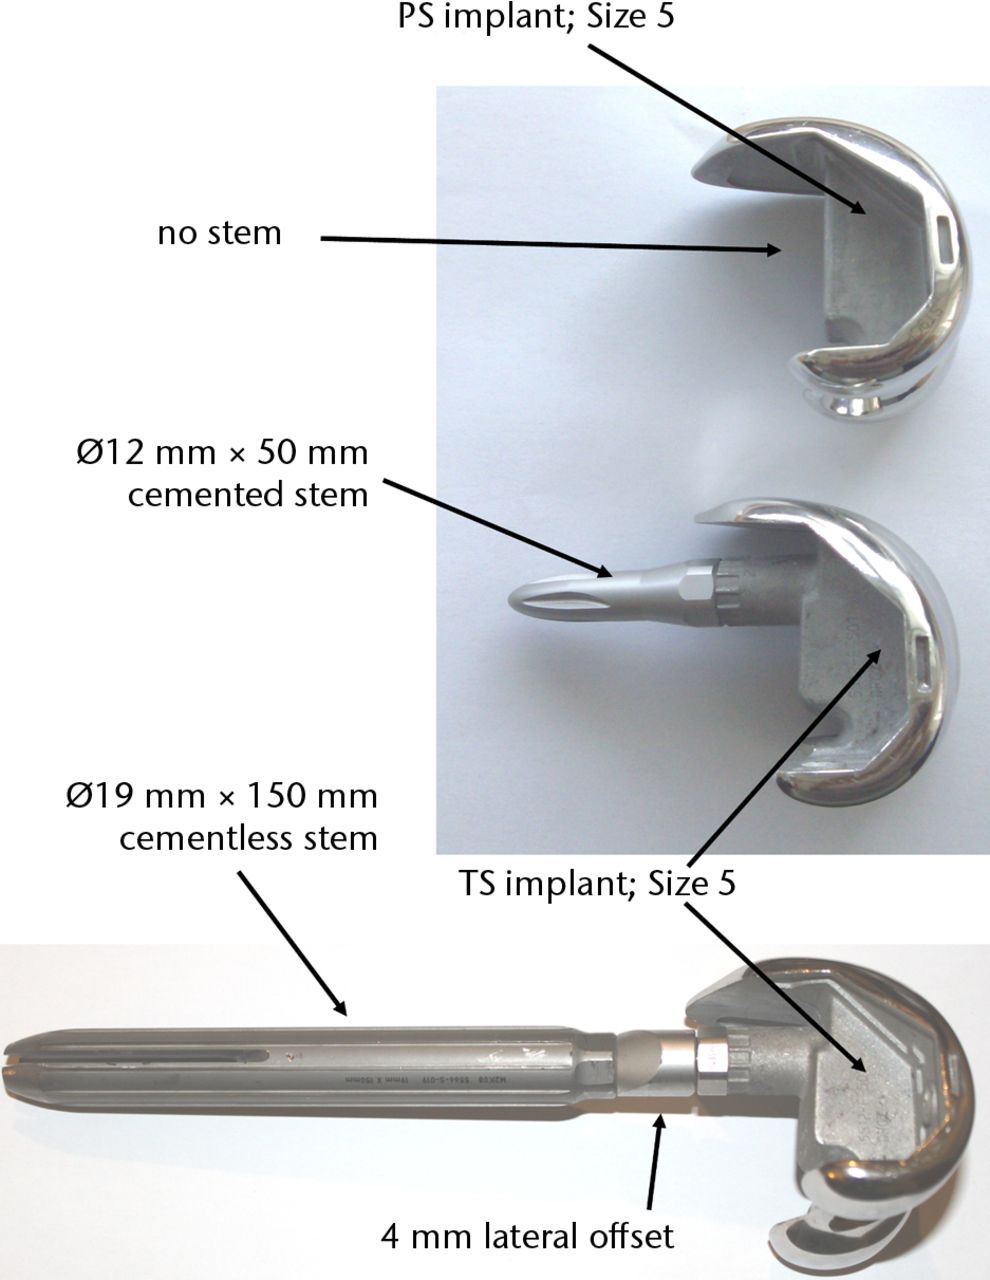 Fig. 2 
            Photographs of the implants investigated,
showing a posterior-stabilised (PS) implant (top row), a total-stabilised
(TS) implant with short stem (middle row) and a TS implant with
long offset stem (bottom row).
          